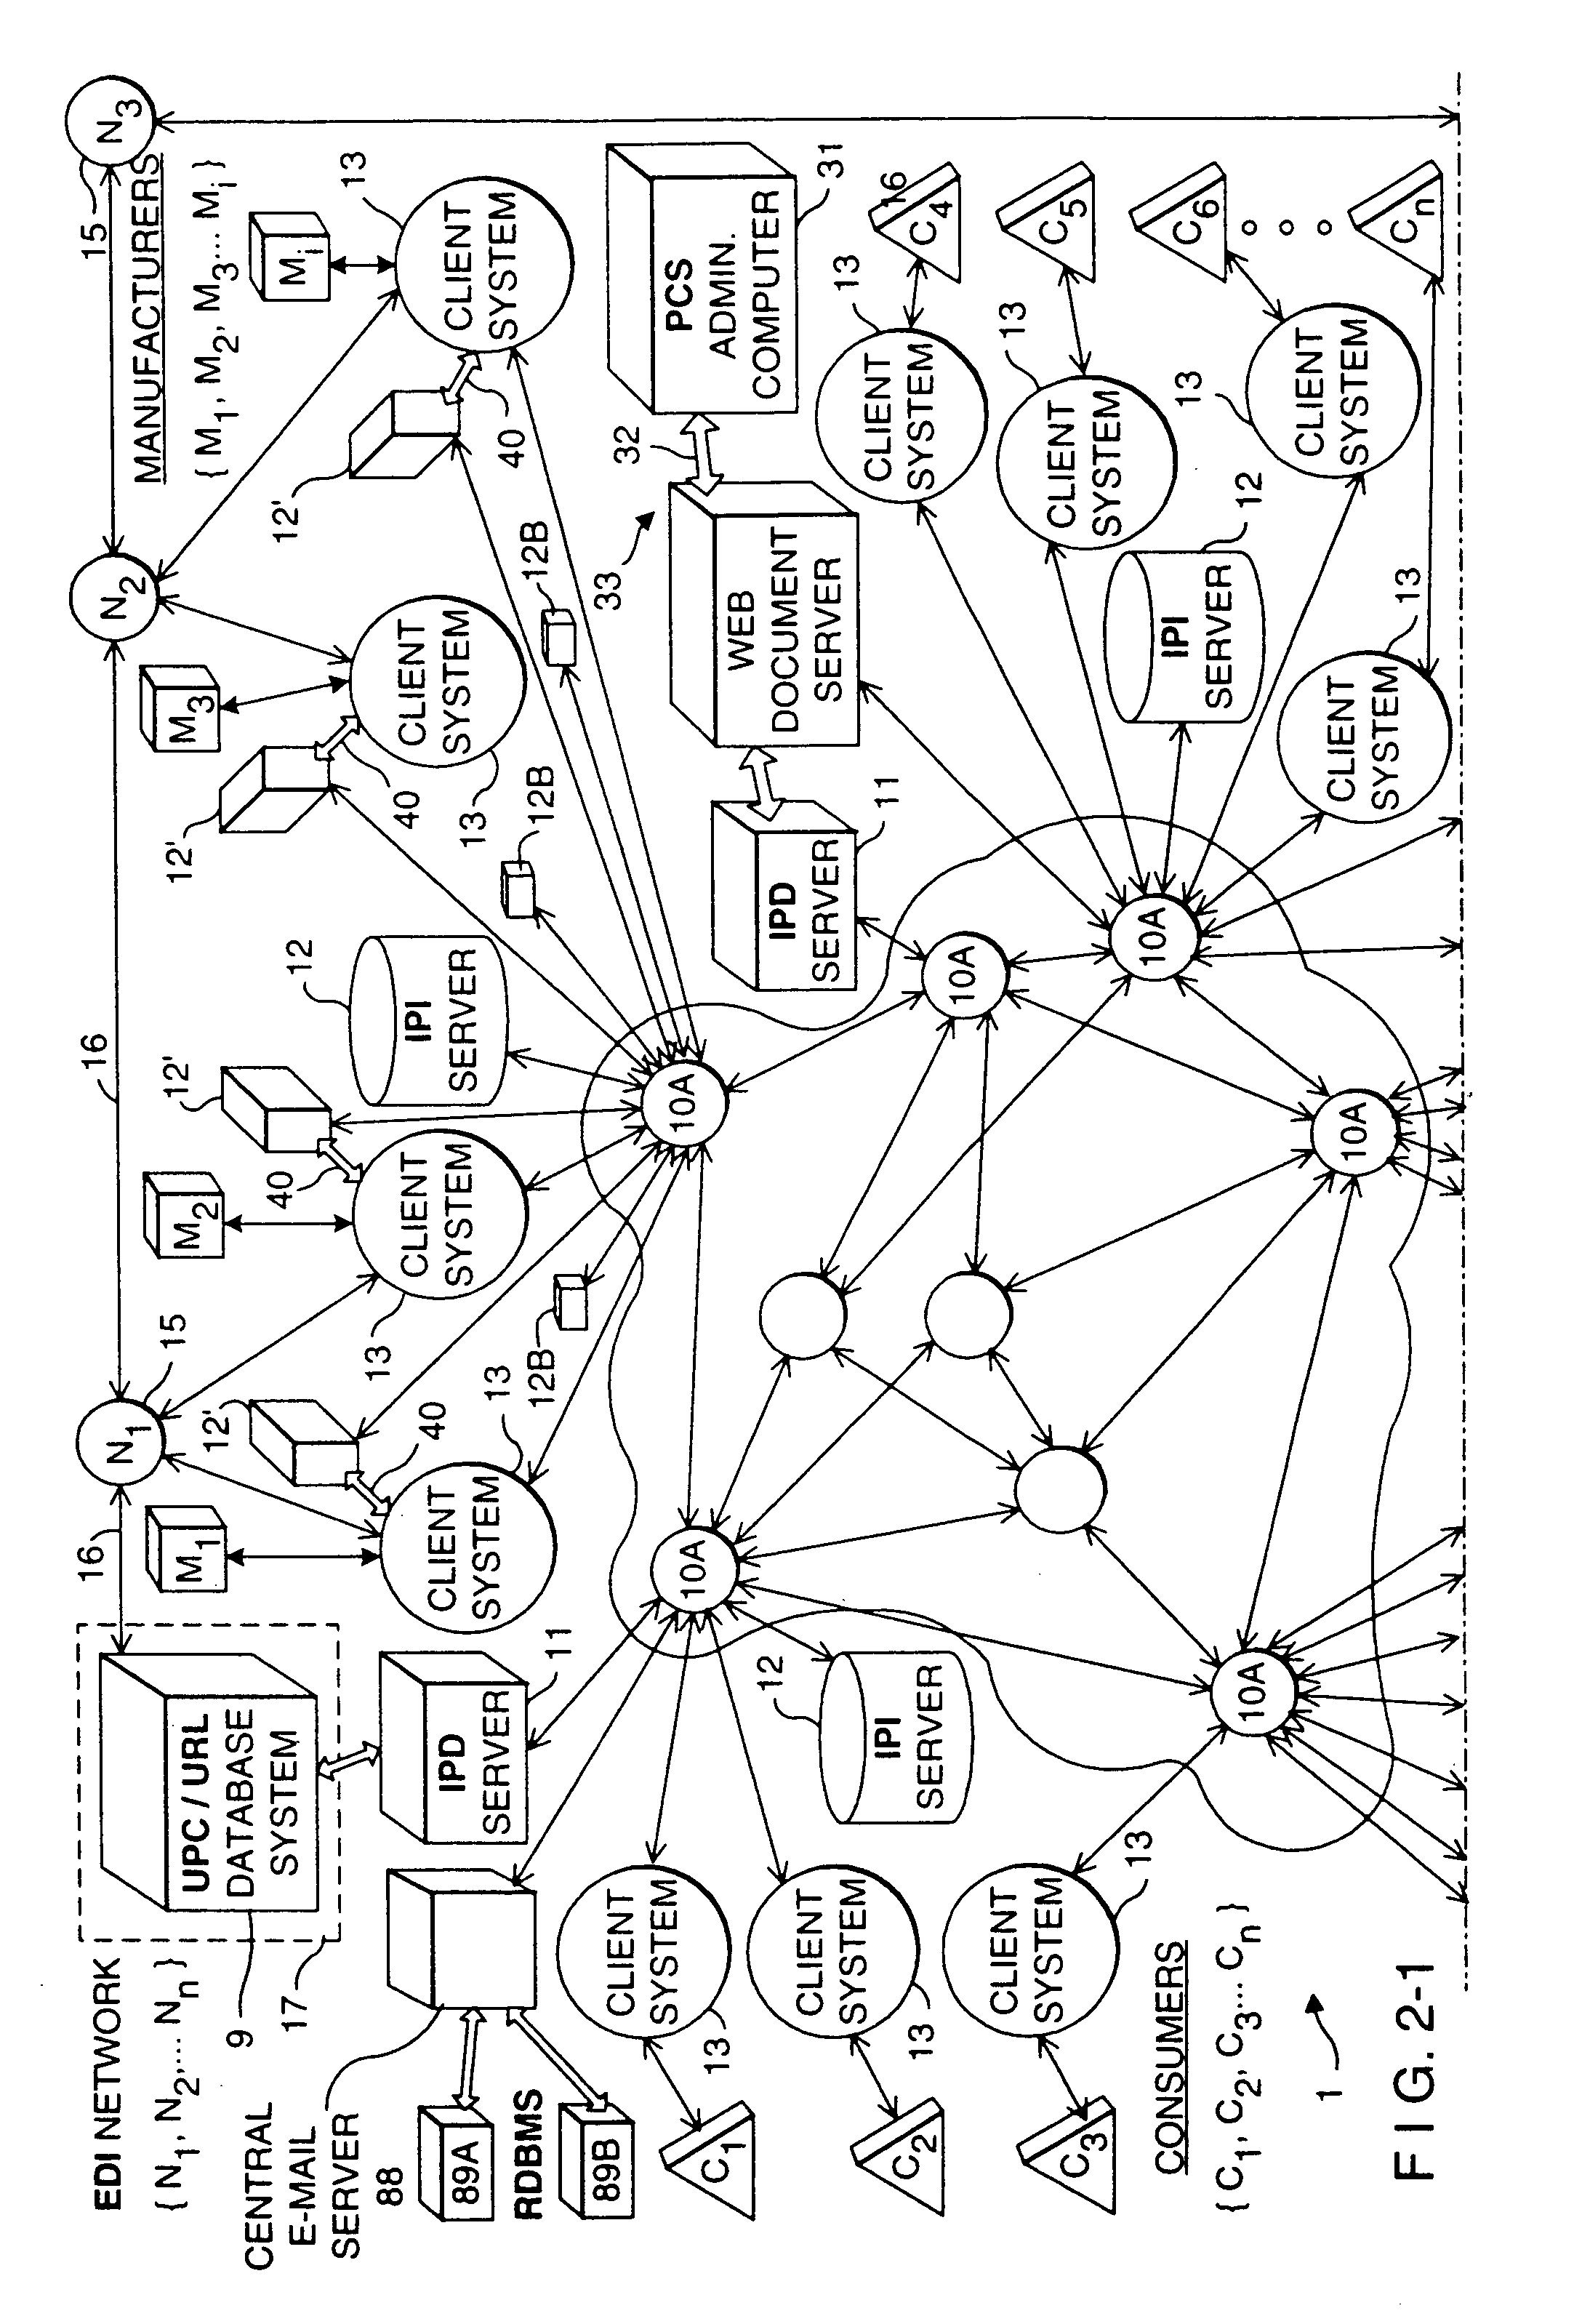 Internet-based method of and system for managing and serving consumer product advertisements to consumers in retail stores